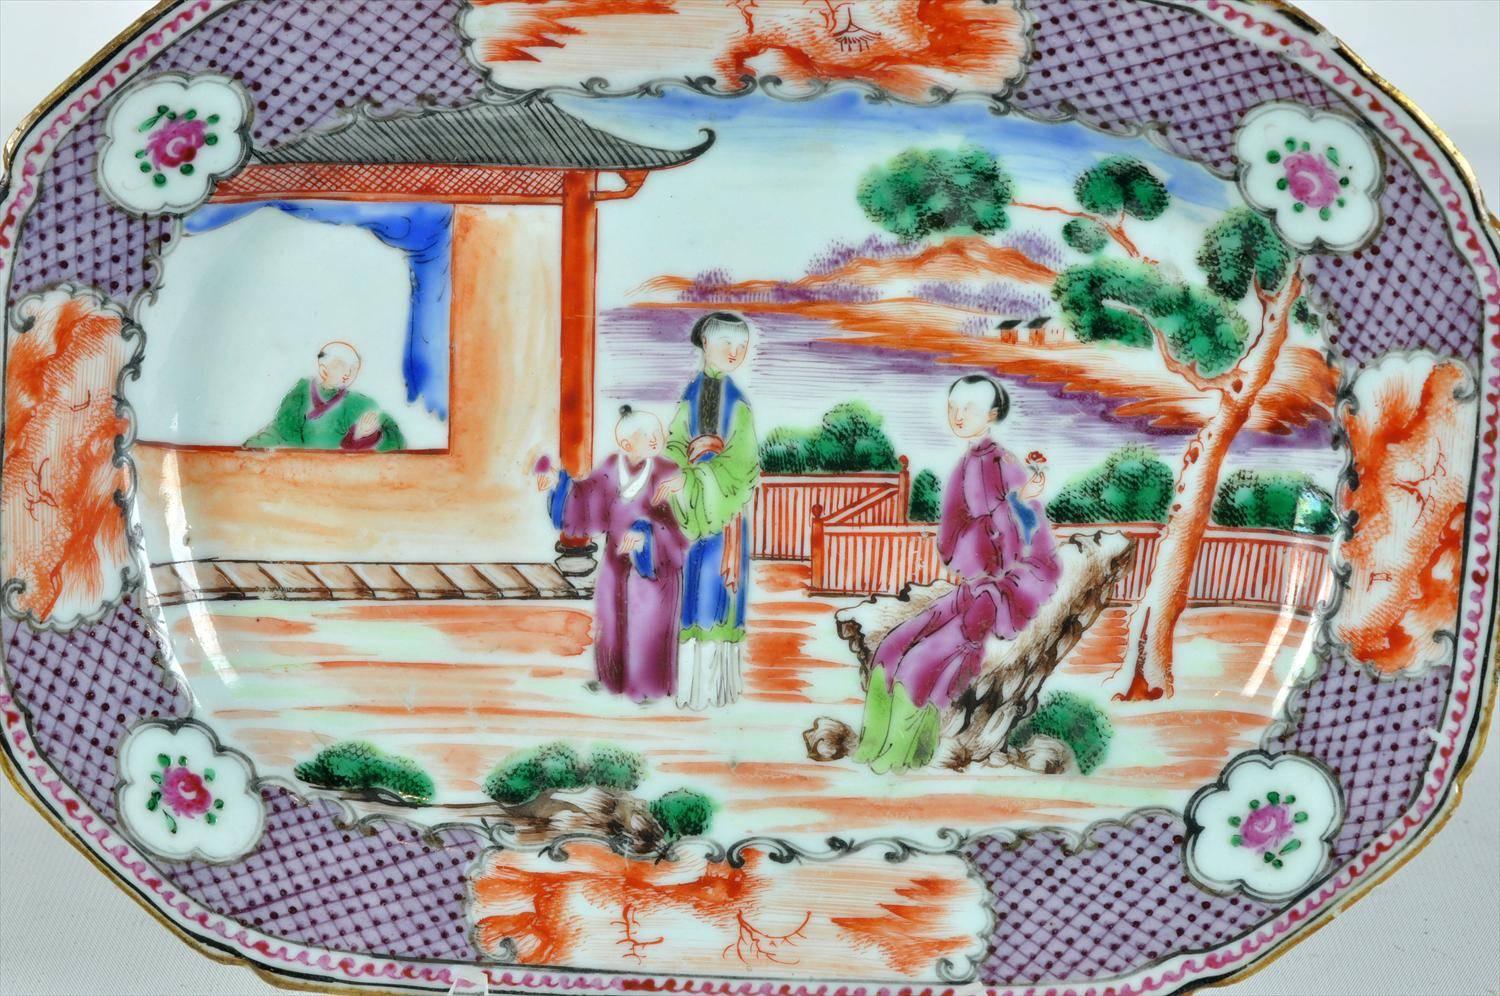 A lovely and scarce China Export Rockefeller pattern hand-painted porcelain serving dish in the Mandarin palette, with red scale, plumb, and gold gilt bands/edges depicting scenic cartouches of women and children in pavilions and gardens, late 18th